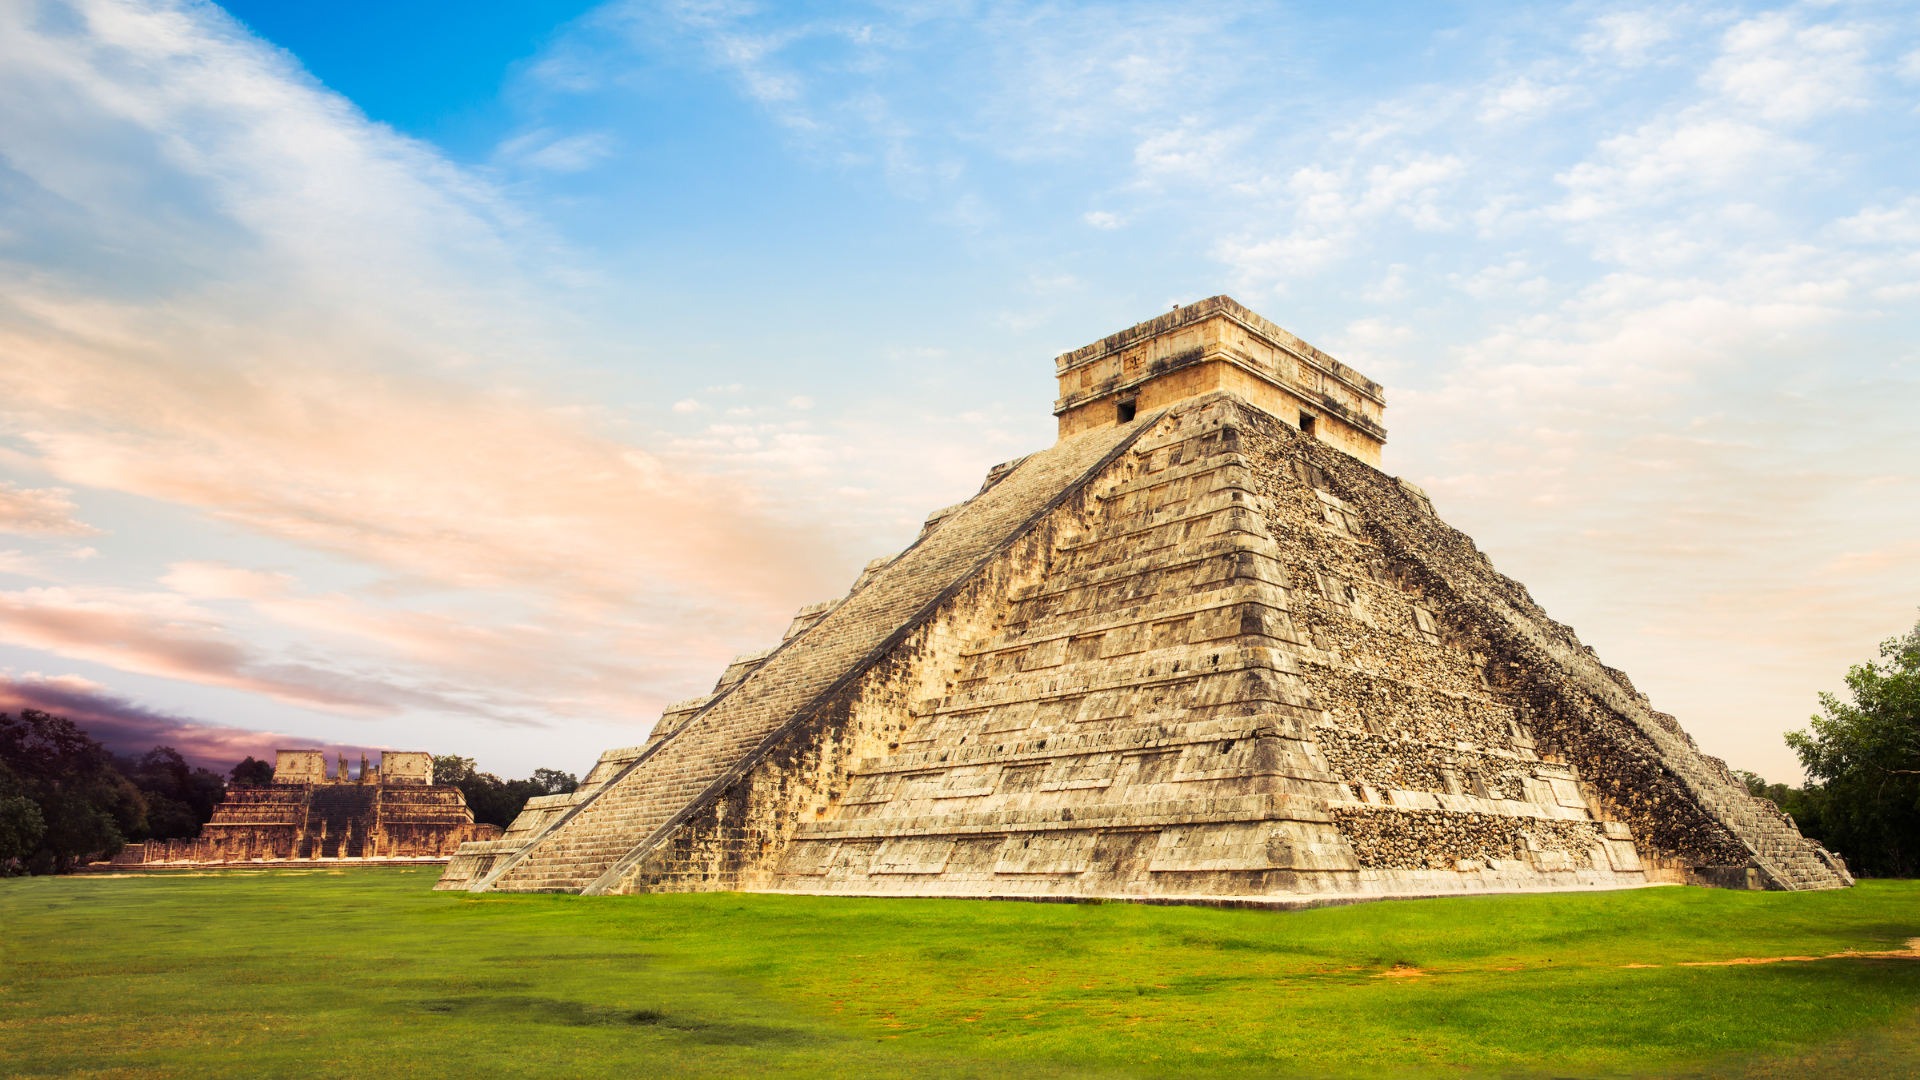 Step back in time as you explore the ancient ruins of Chichen Itza in Mexico. This UNESCO World Heritage Site showcases the remnants of the ancient Mayan civilization. Marvel at the iconic El Castillo pyramid, known for its architectural precision and astronomical significance. Travel back in time and immerse yourself in the history and mystery of this awe-inspiring archaeological site.